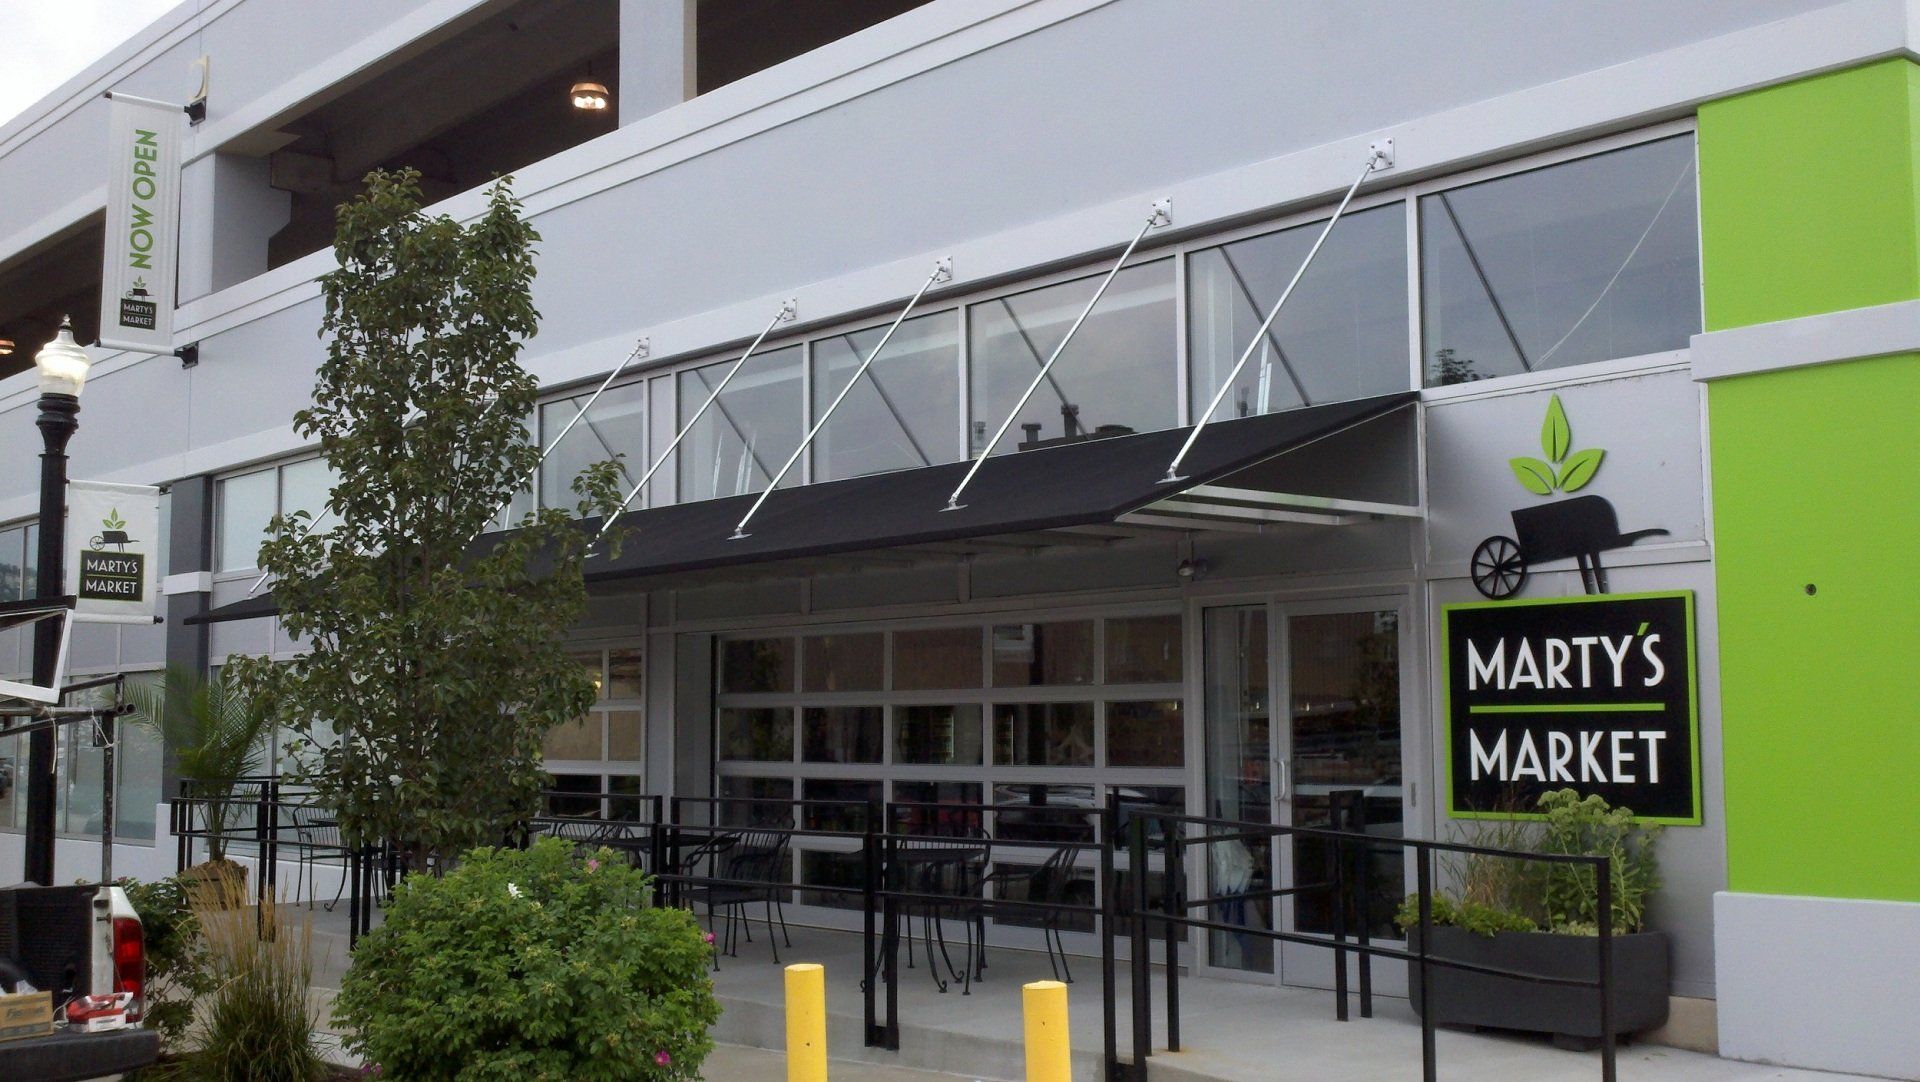 Commercial awning-14 — Custom awnings in Pittsburgh, PA